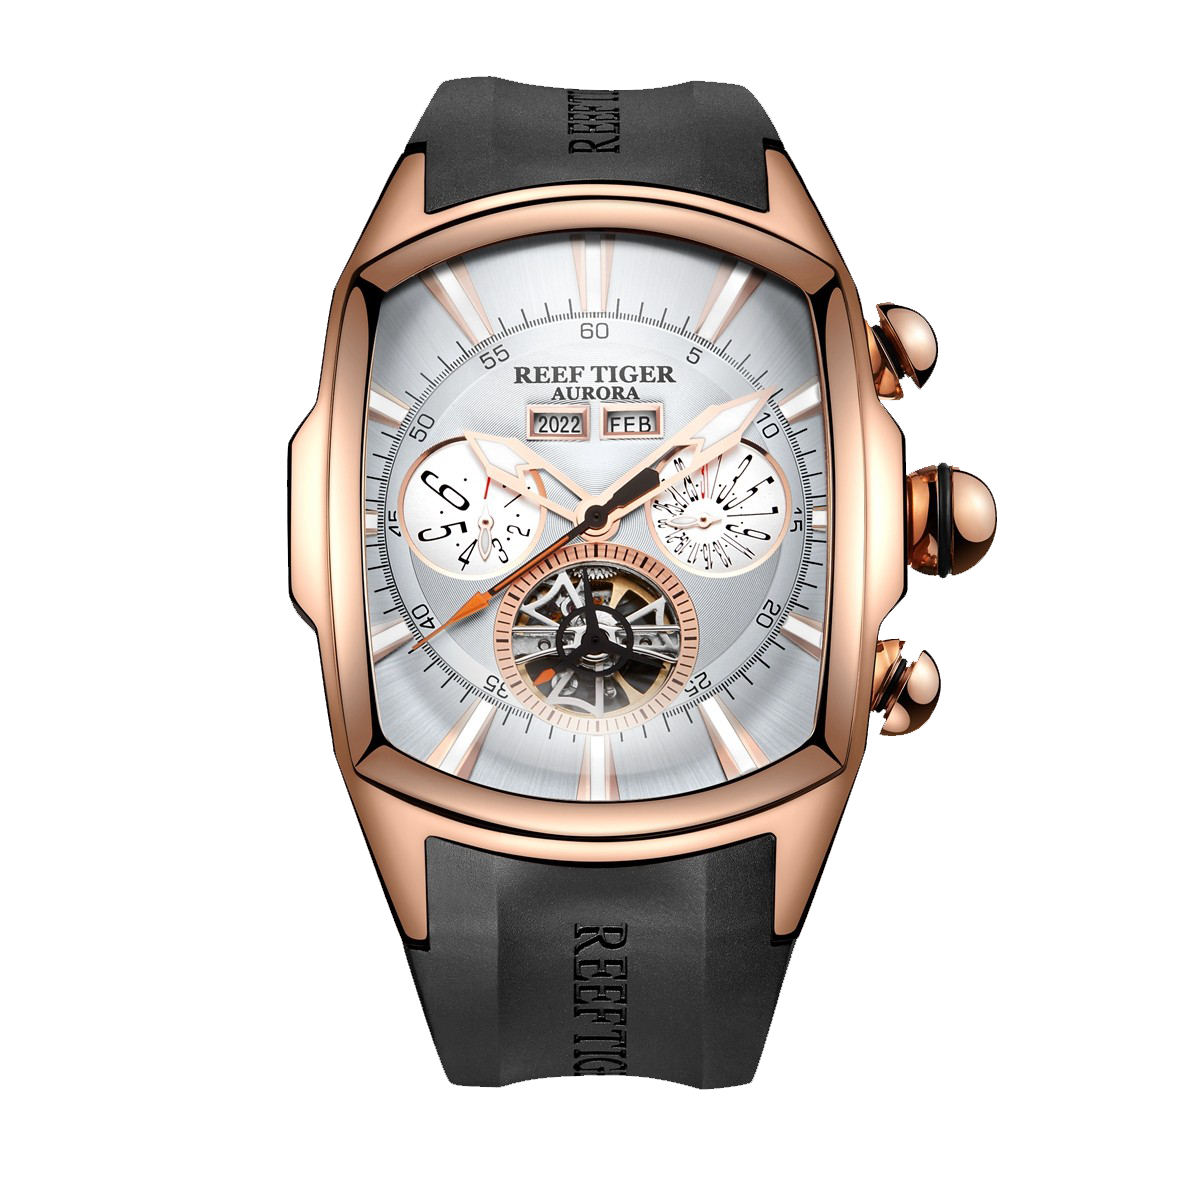 Reef Tiger Aurora Tank II Rose Gold Luxury Sports Automatic Military Watch for Men's